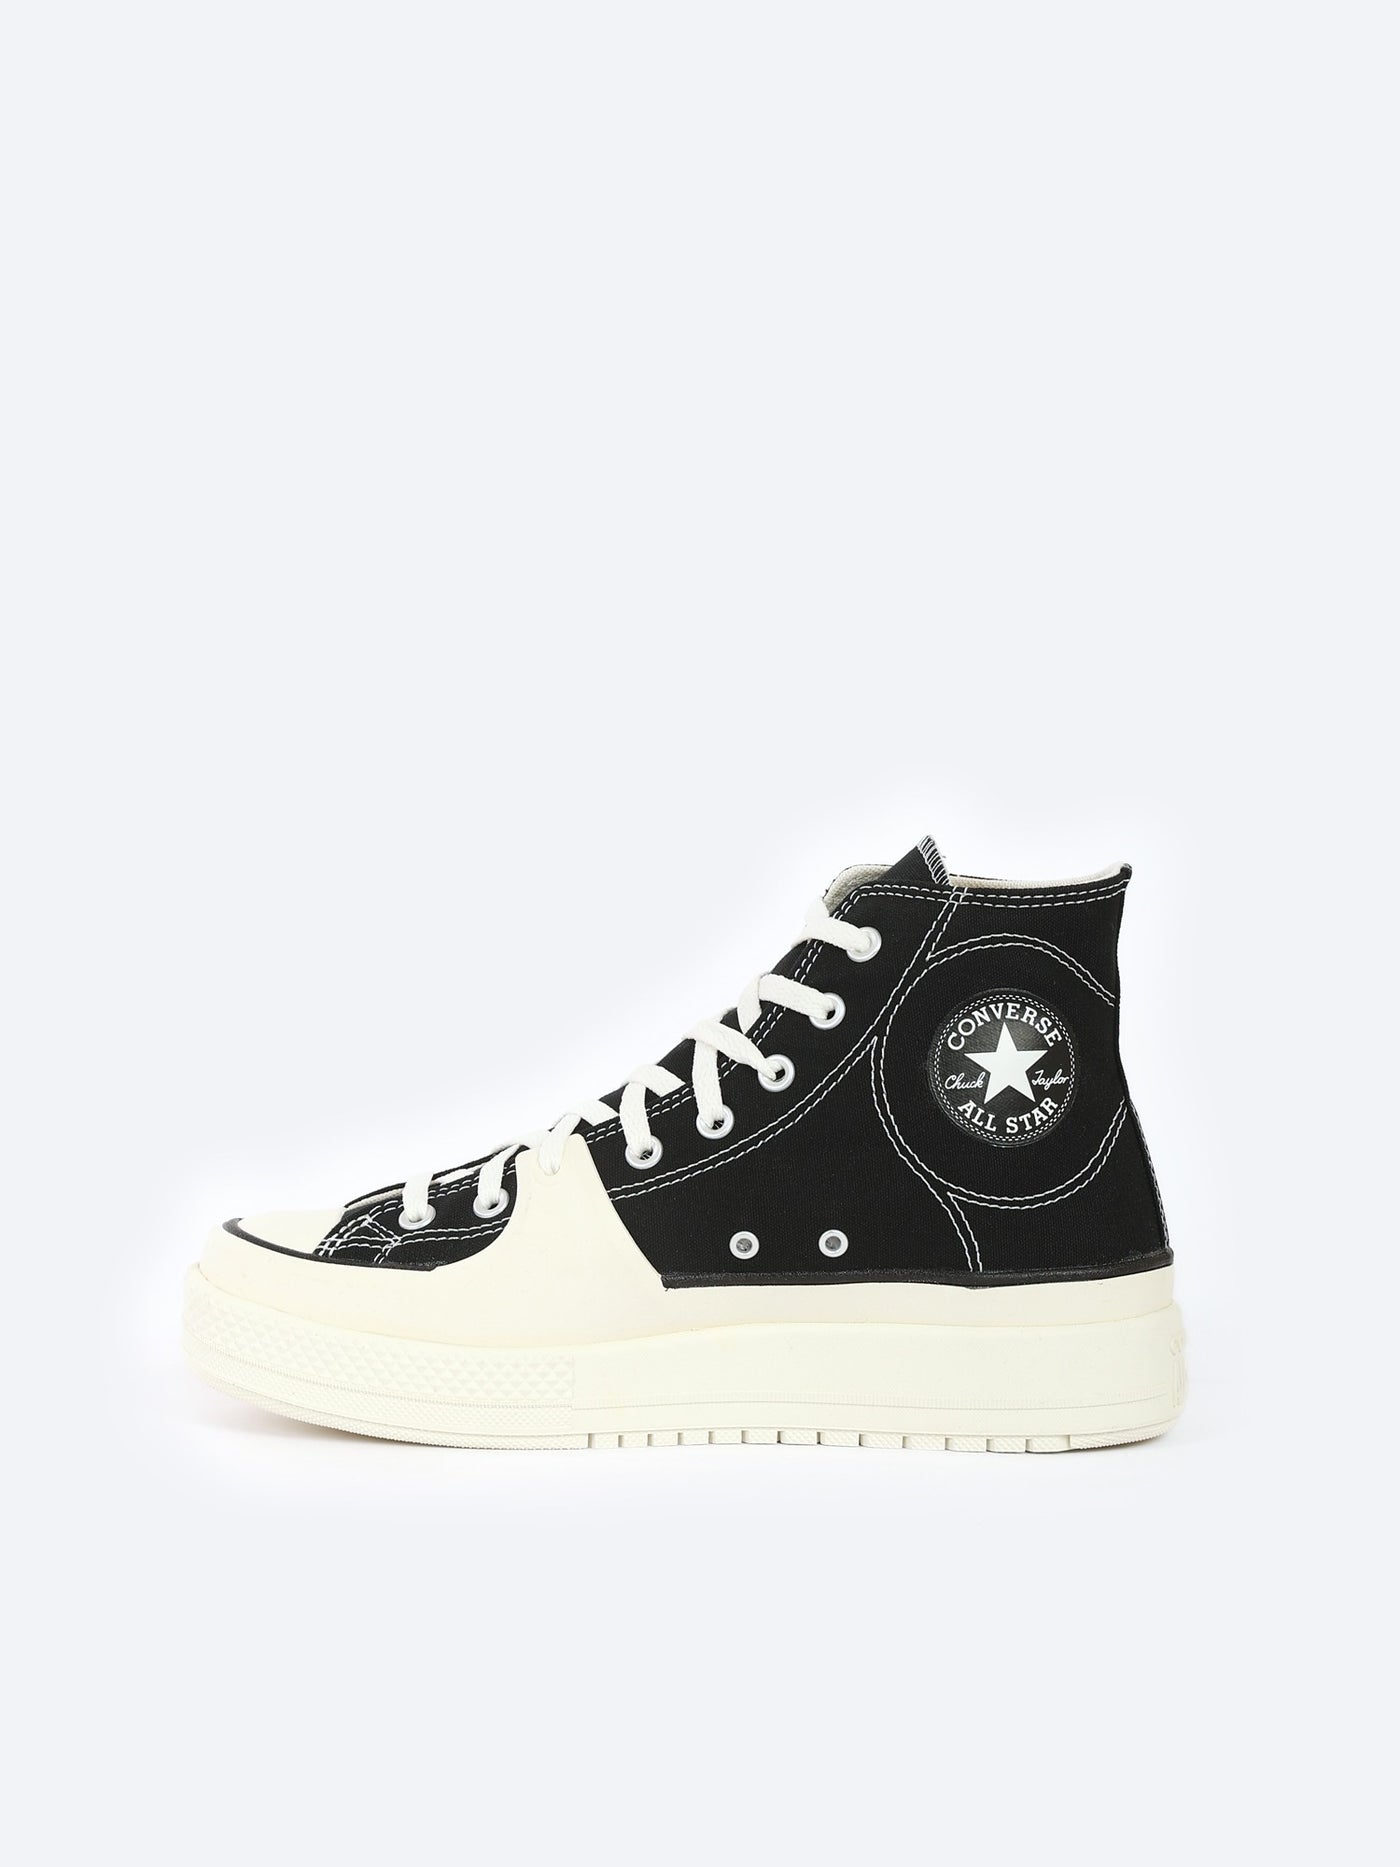 Sneakers - Chuck Taylor All Star - Construct